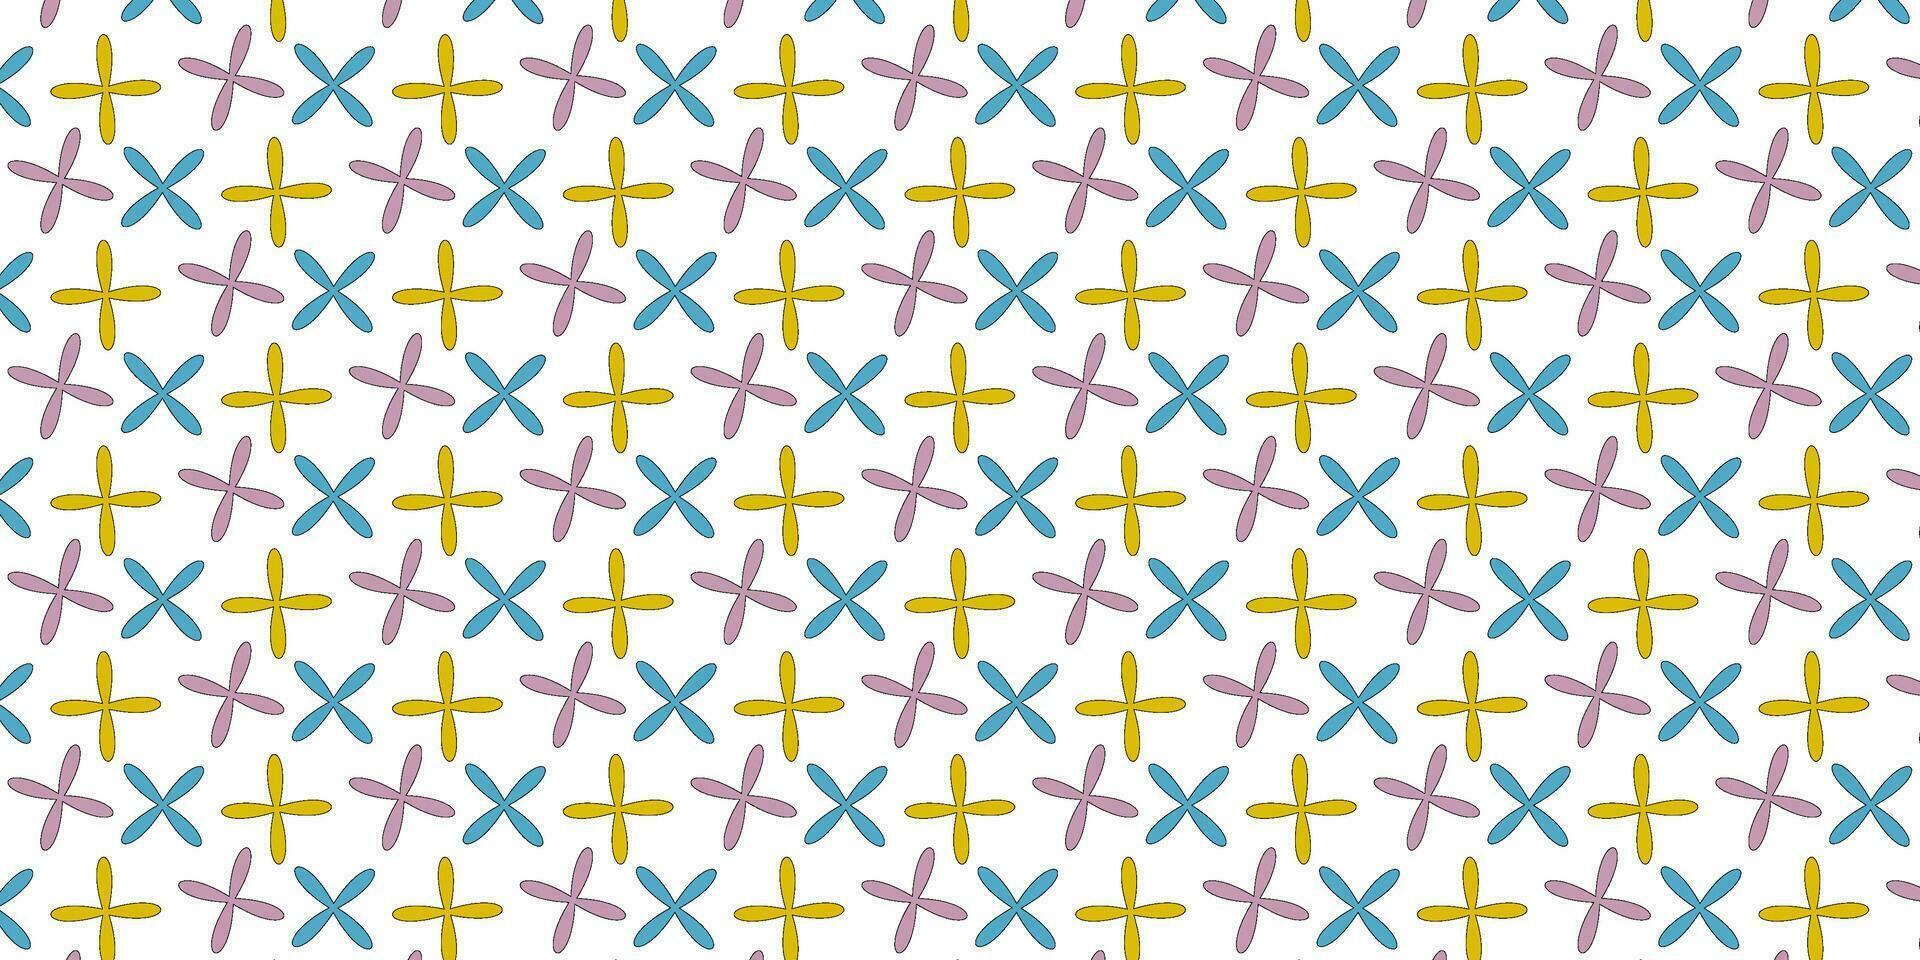 Retro futuristic pattern. Star shape set. Abstract 90s aesthetic vector design. Templates for design, posters, textiles, banners.